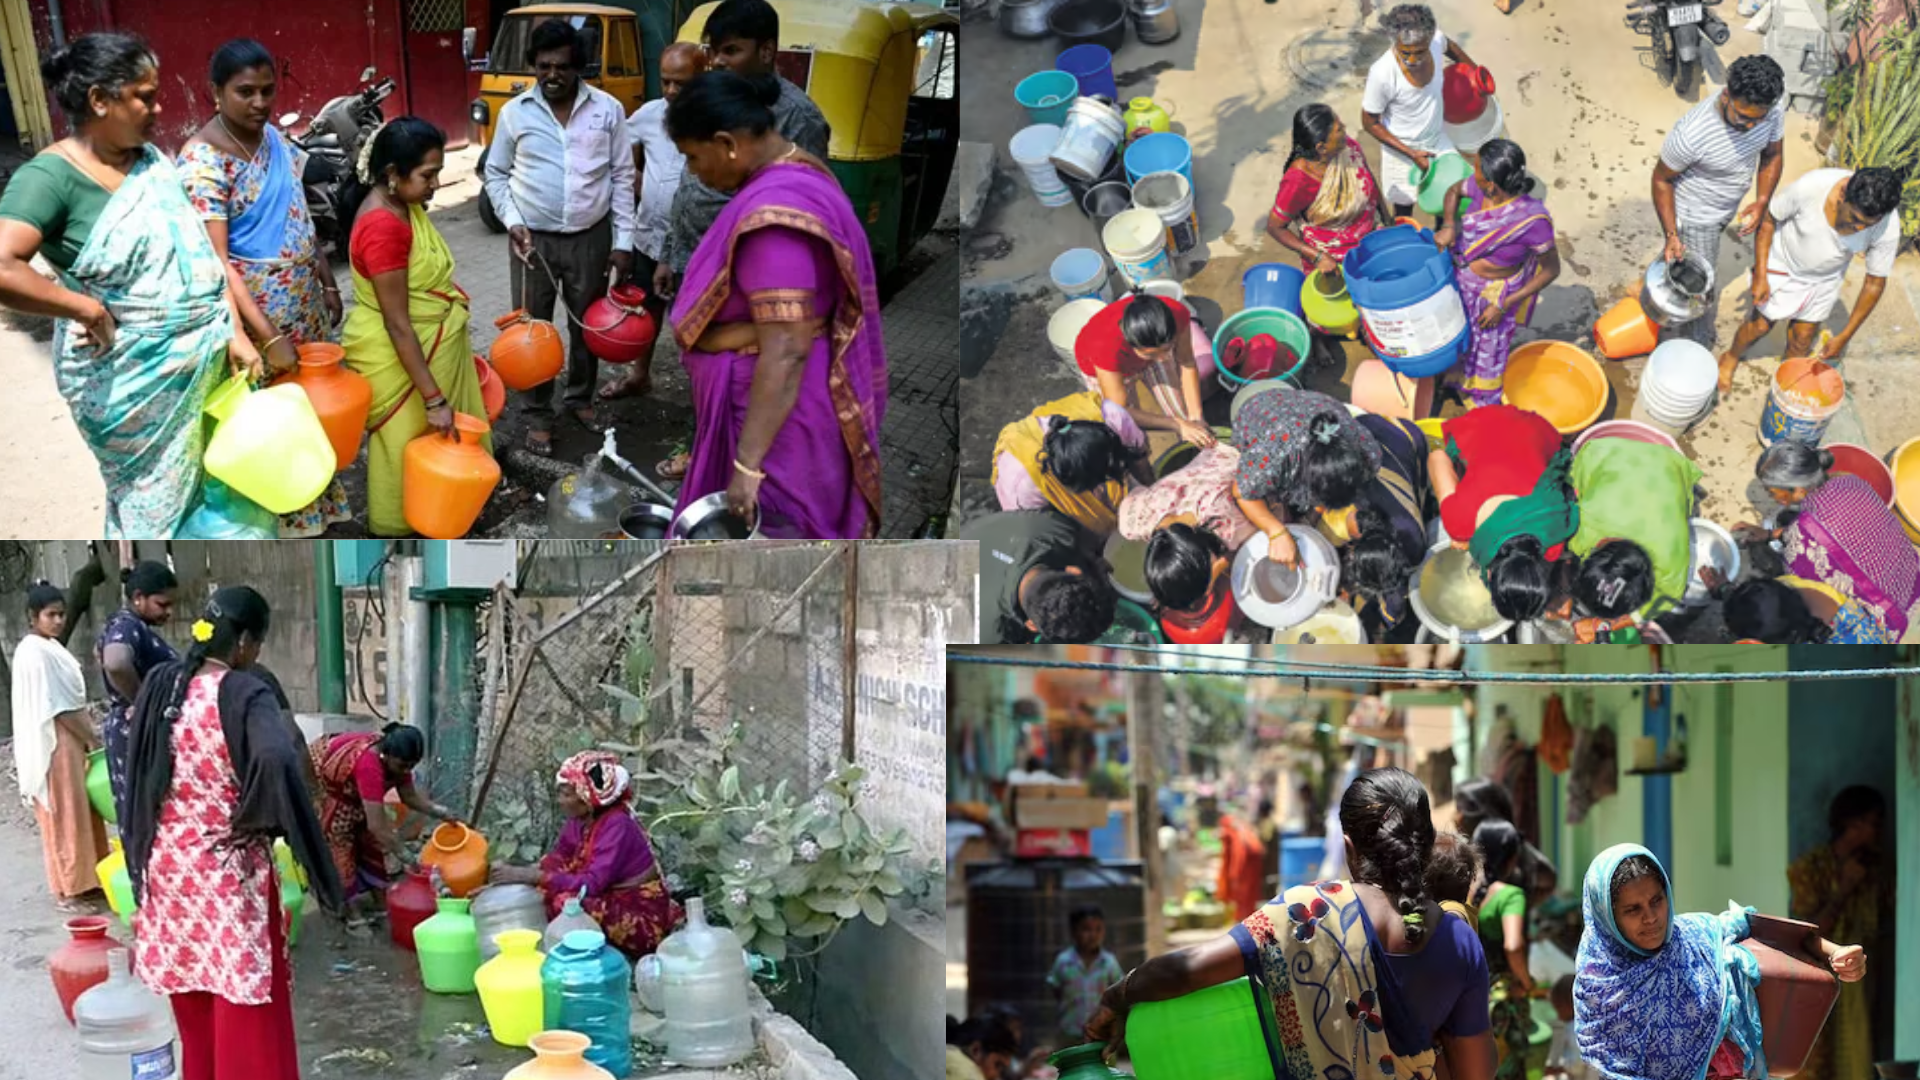 Bengaluru Residents Grapple With Drinking Water Shortage Amid Drought Crisis